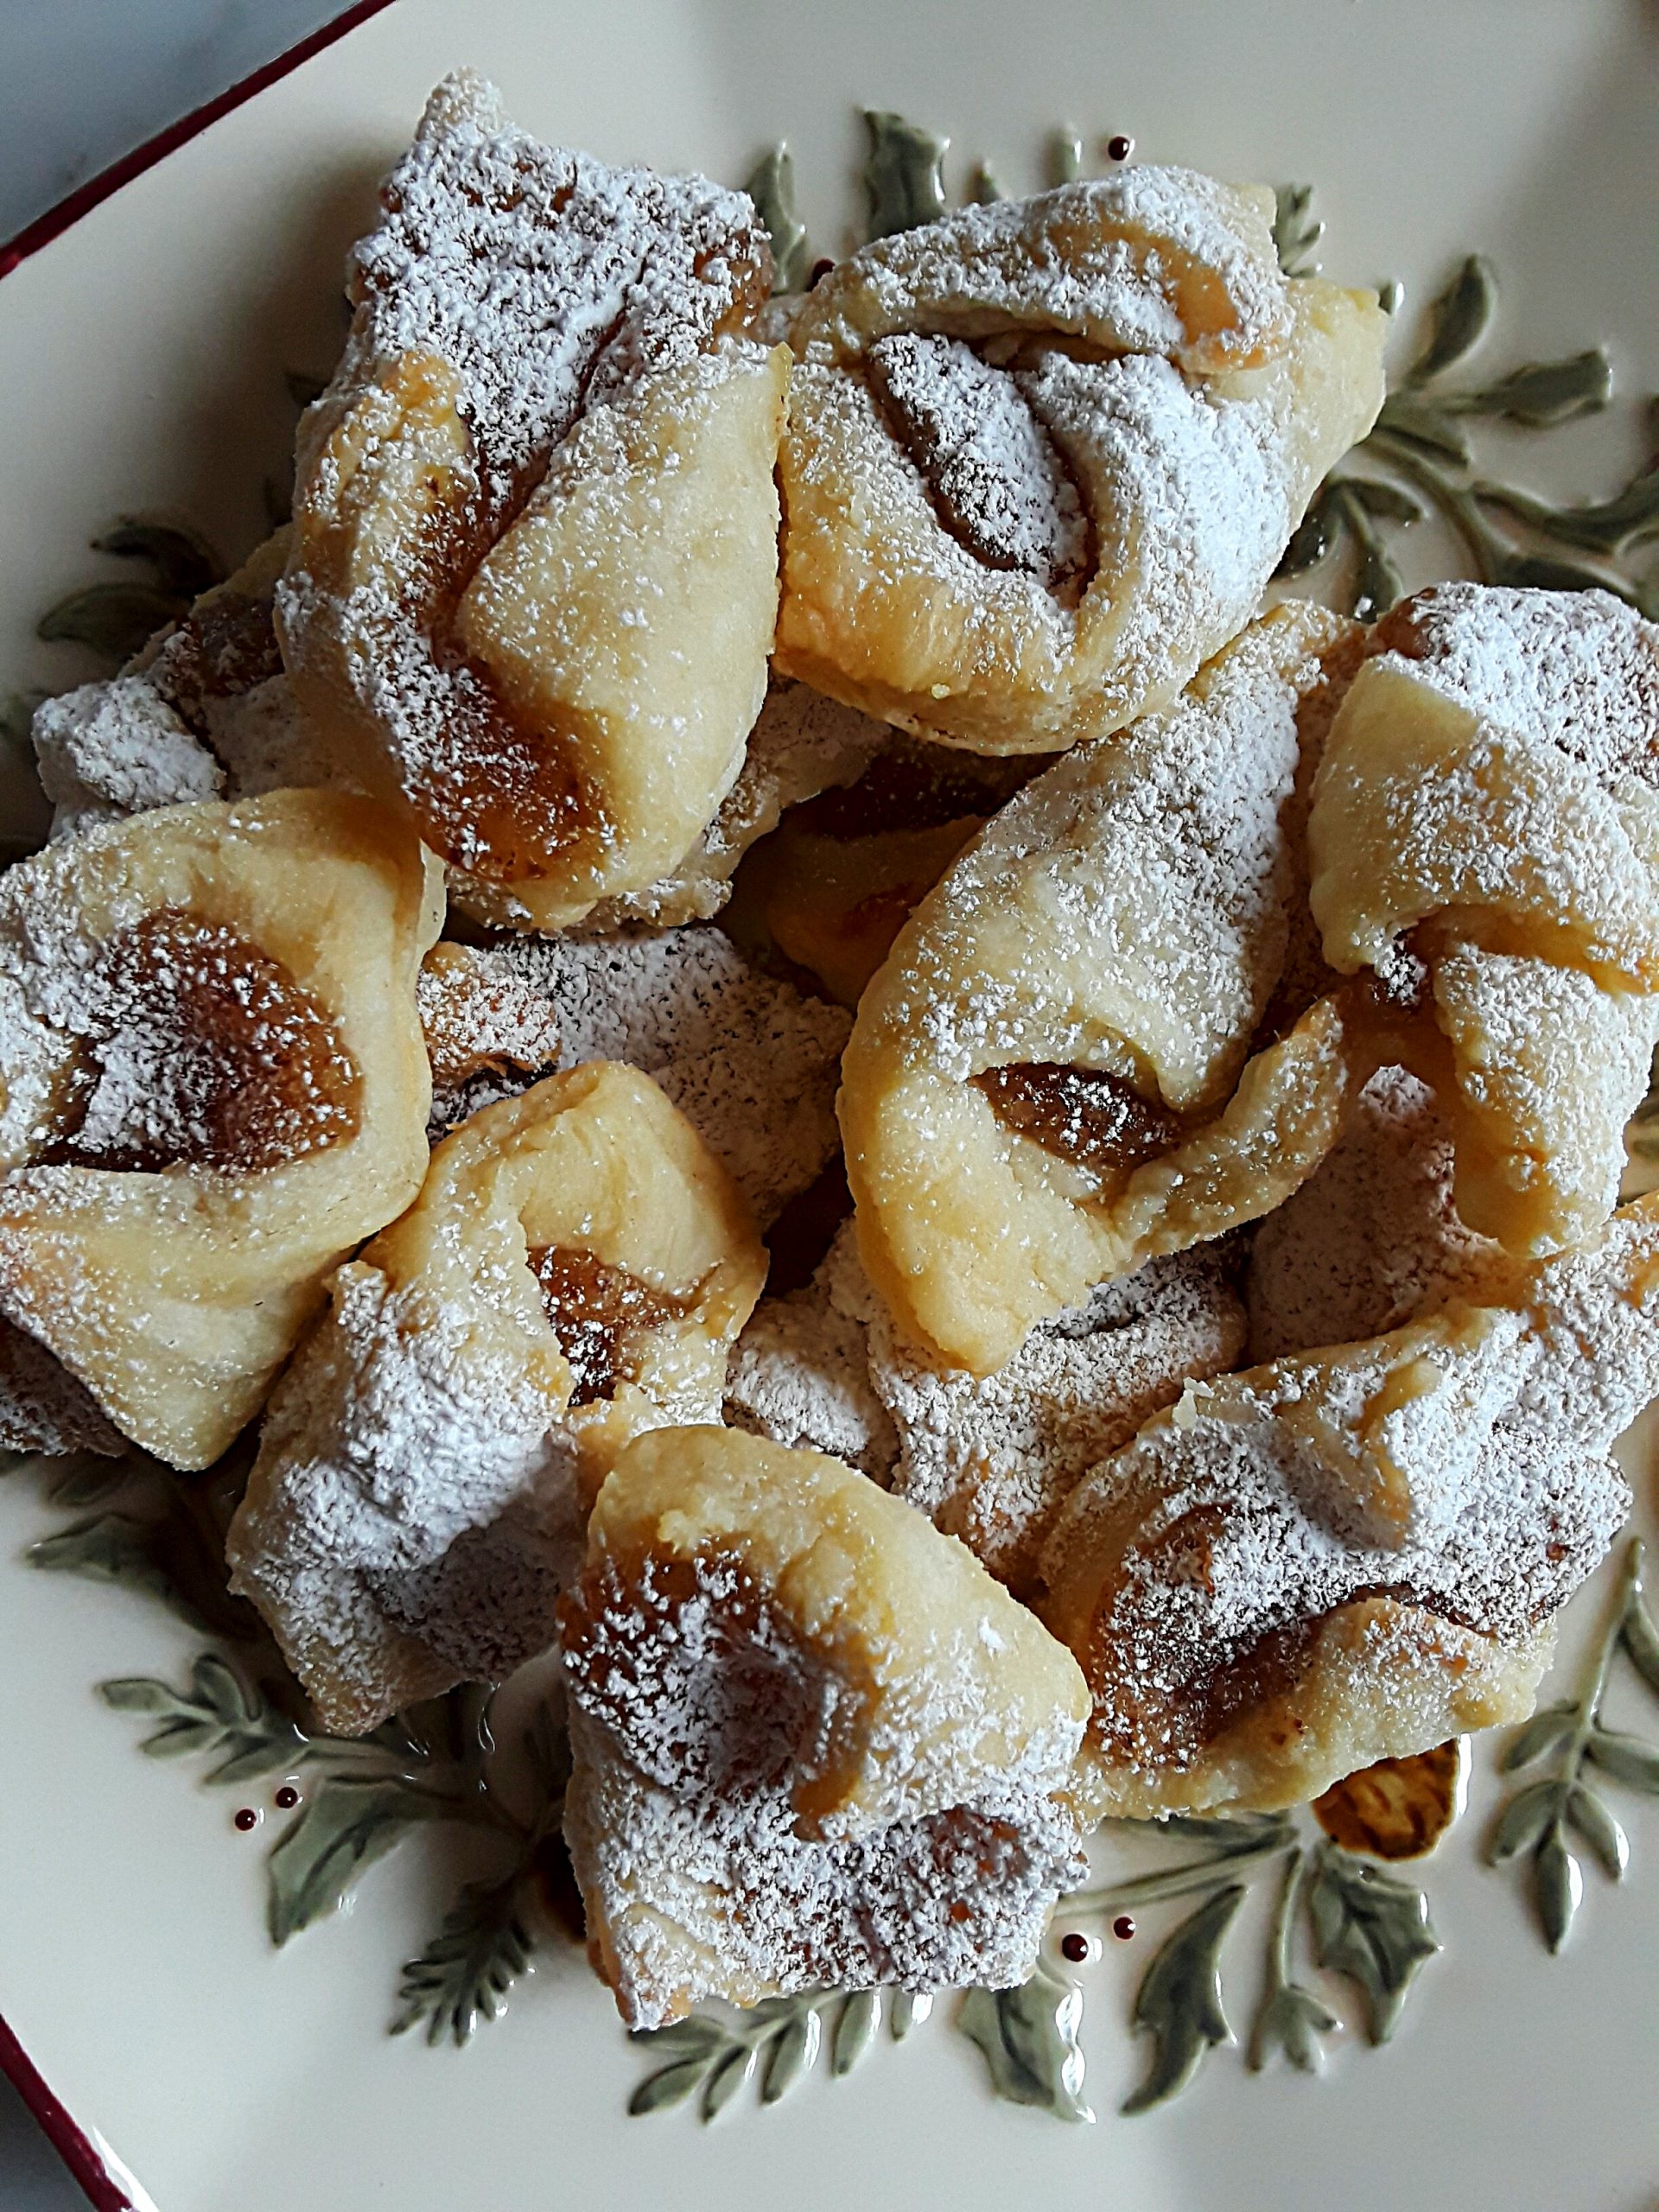 kolachki cookies are dusted with confectioner's sugar